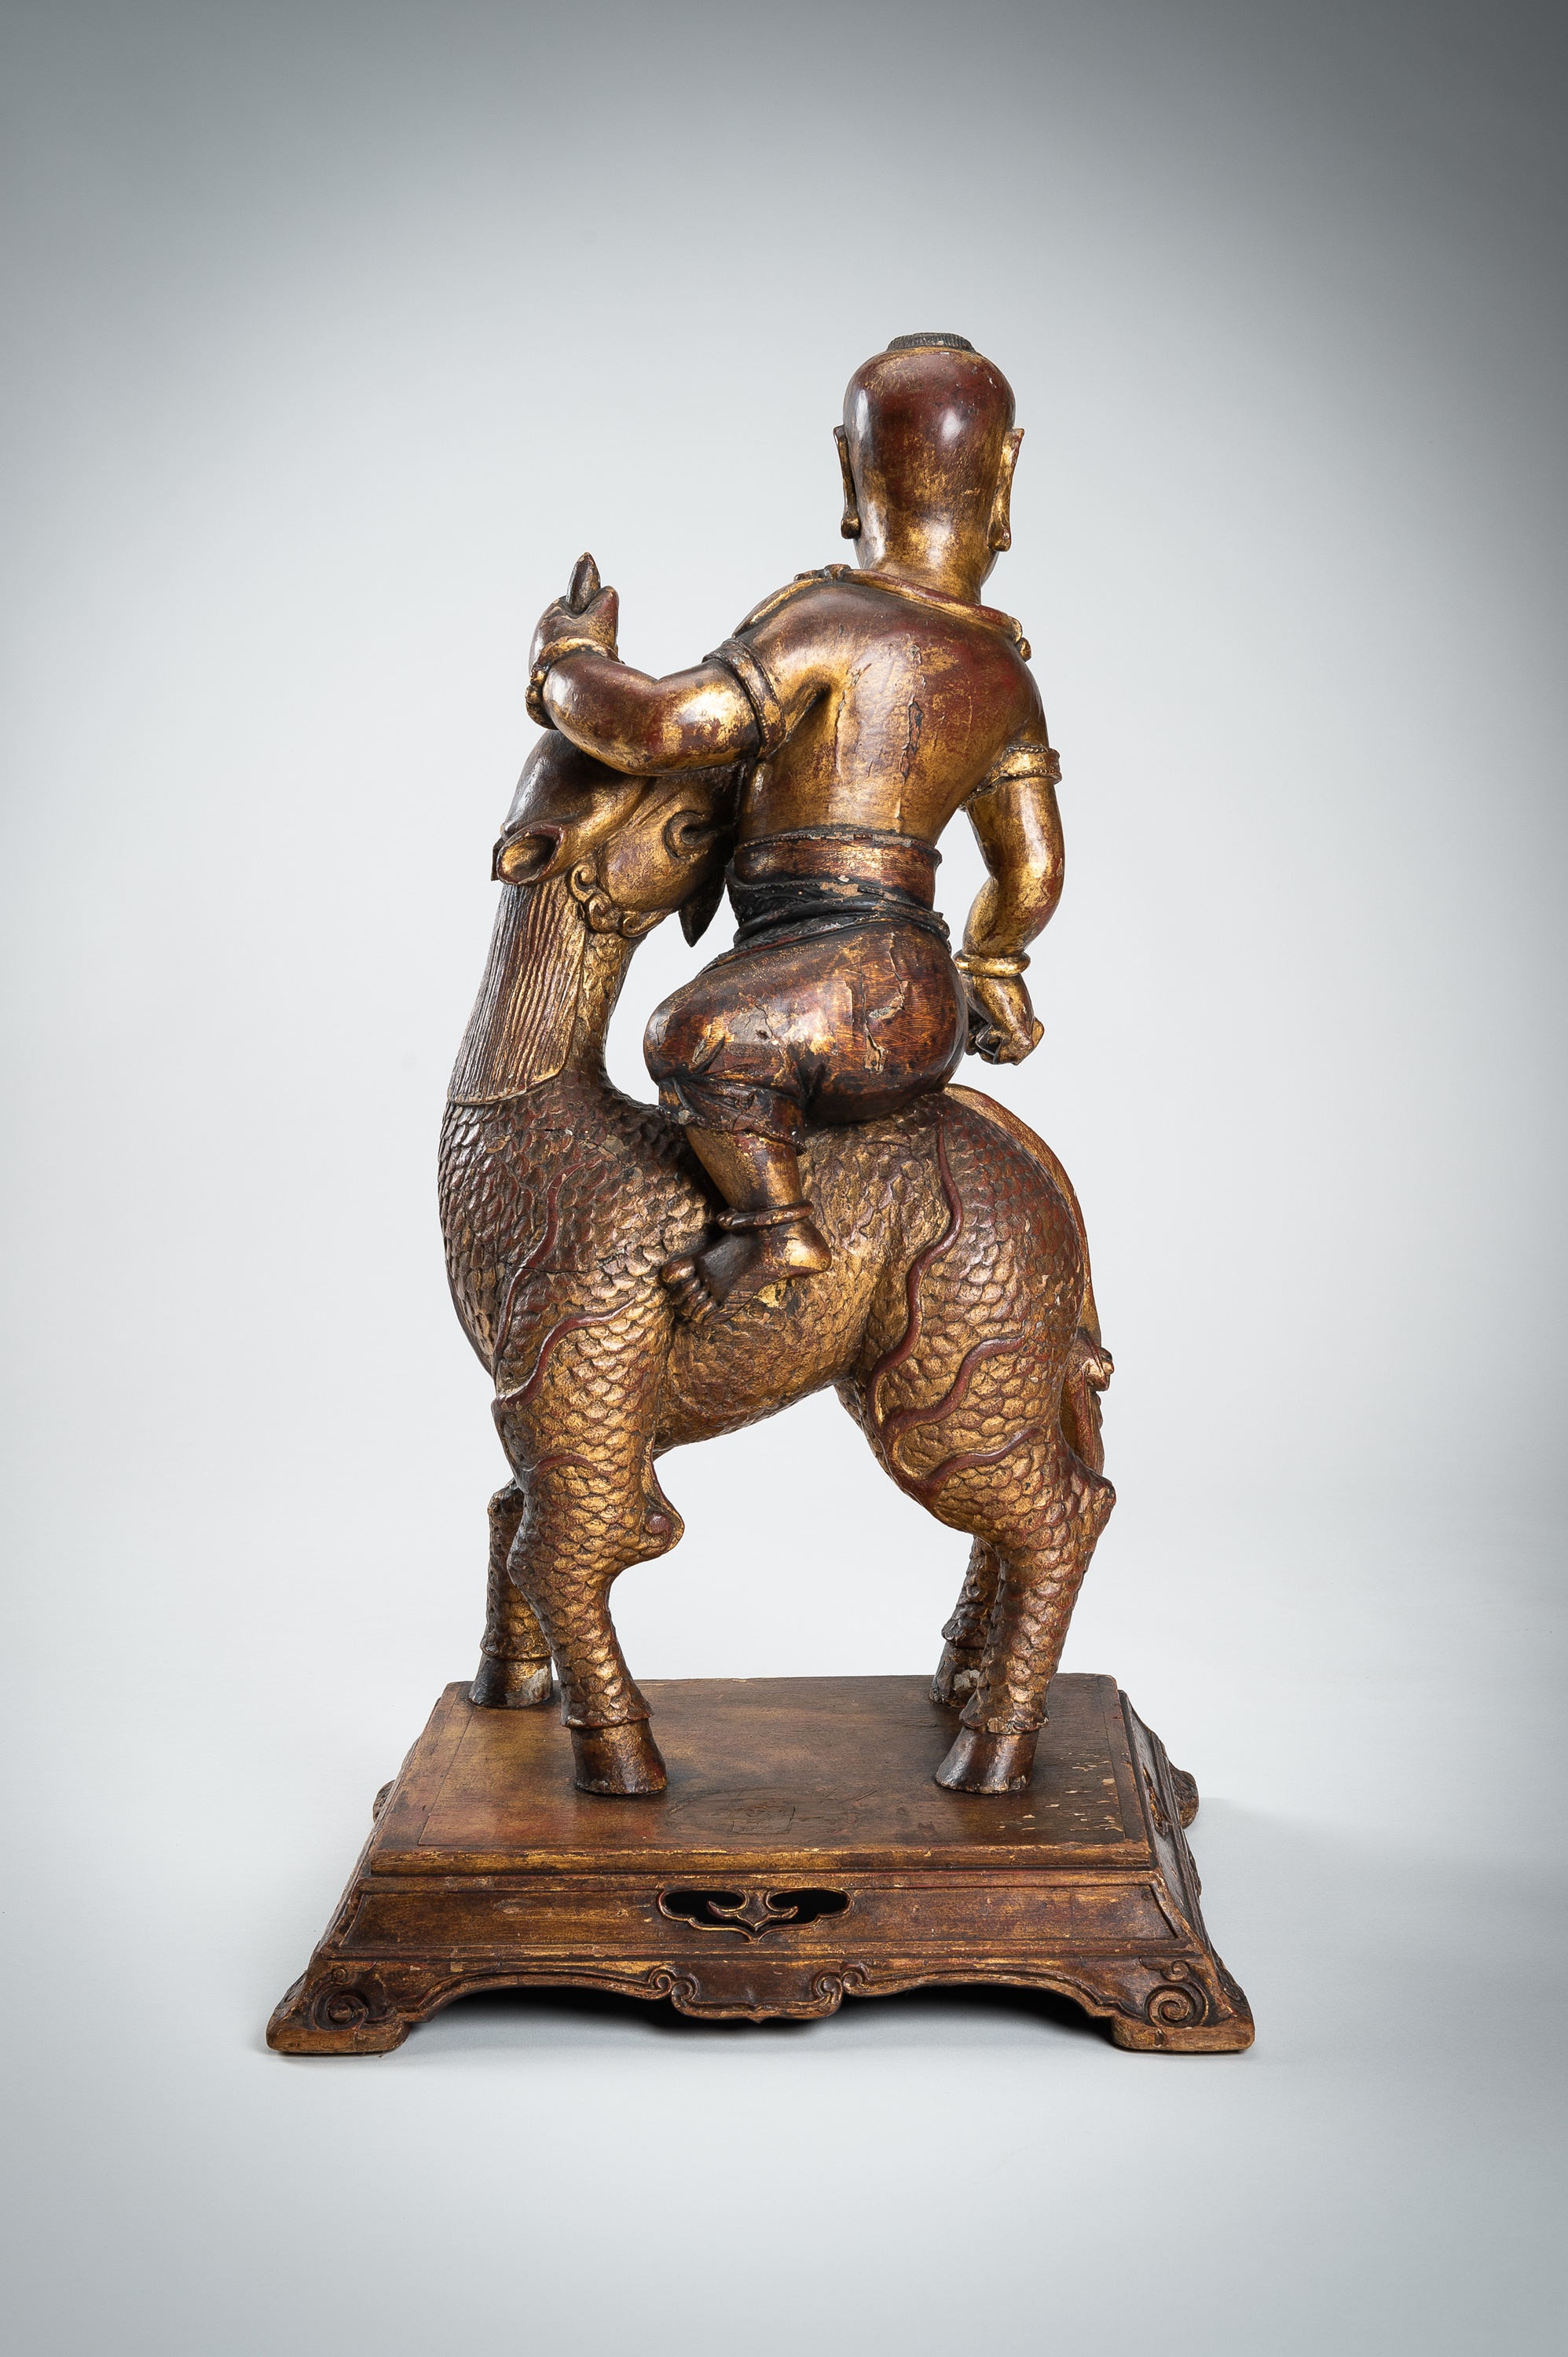 A VERY LARGE GILT-LACQUERED WOOD STATUE OF YOUNG BUDDHA RIDING QILIN - Image 18 of 20